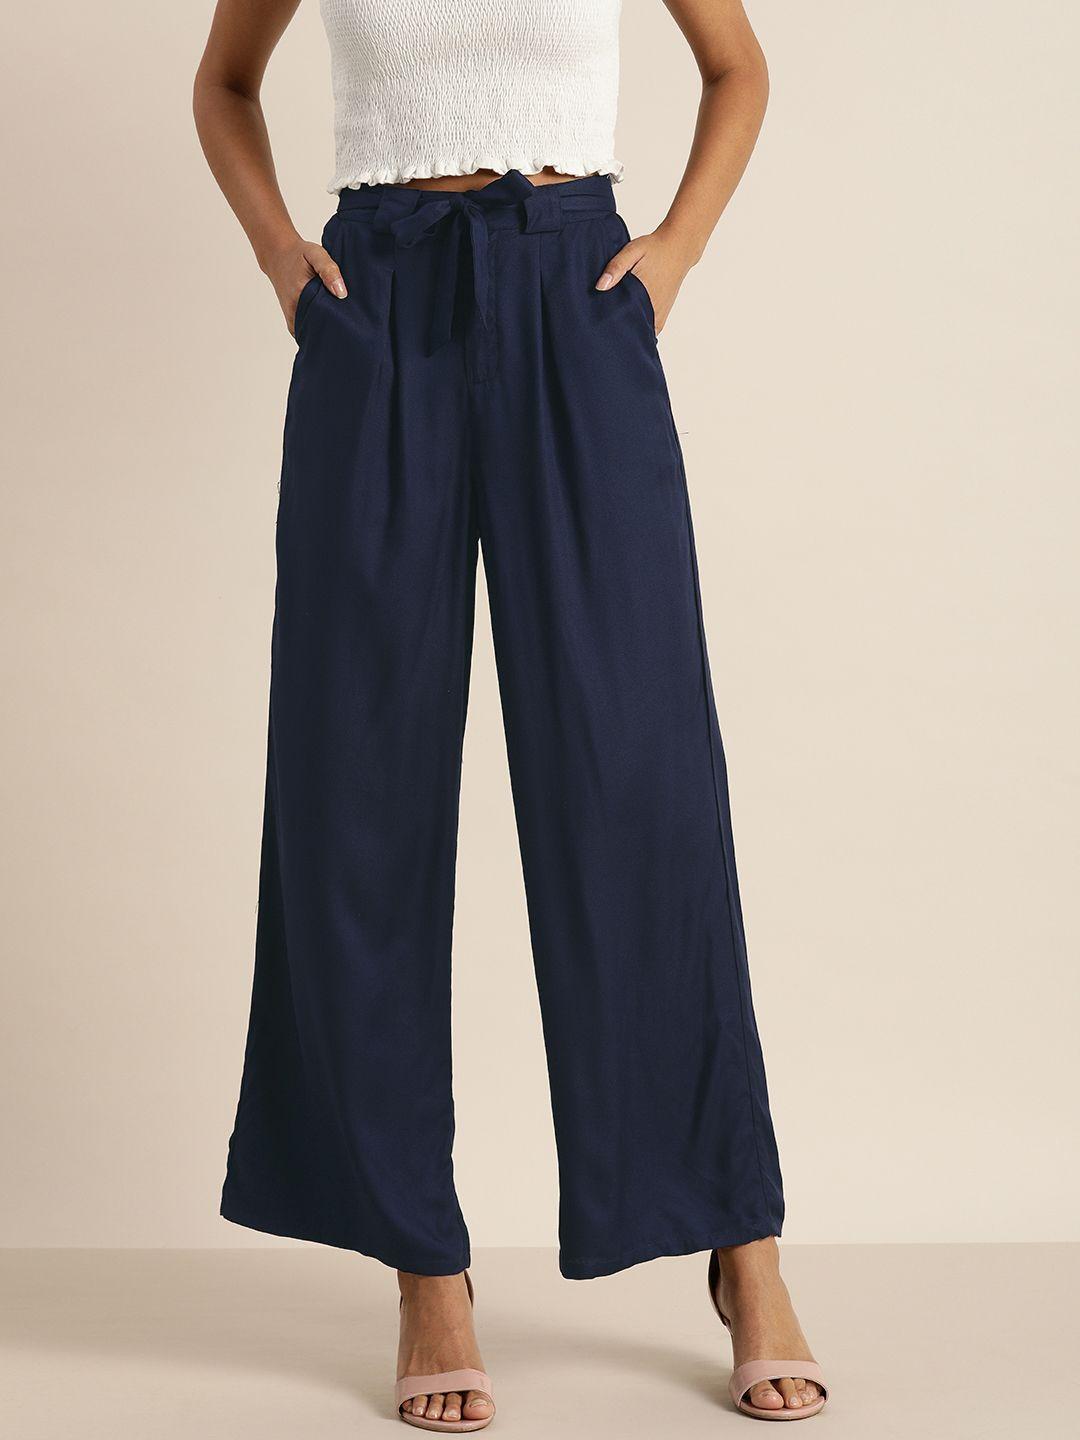 all about you women navy blue regular fit solid pleated parallel trousers